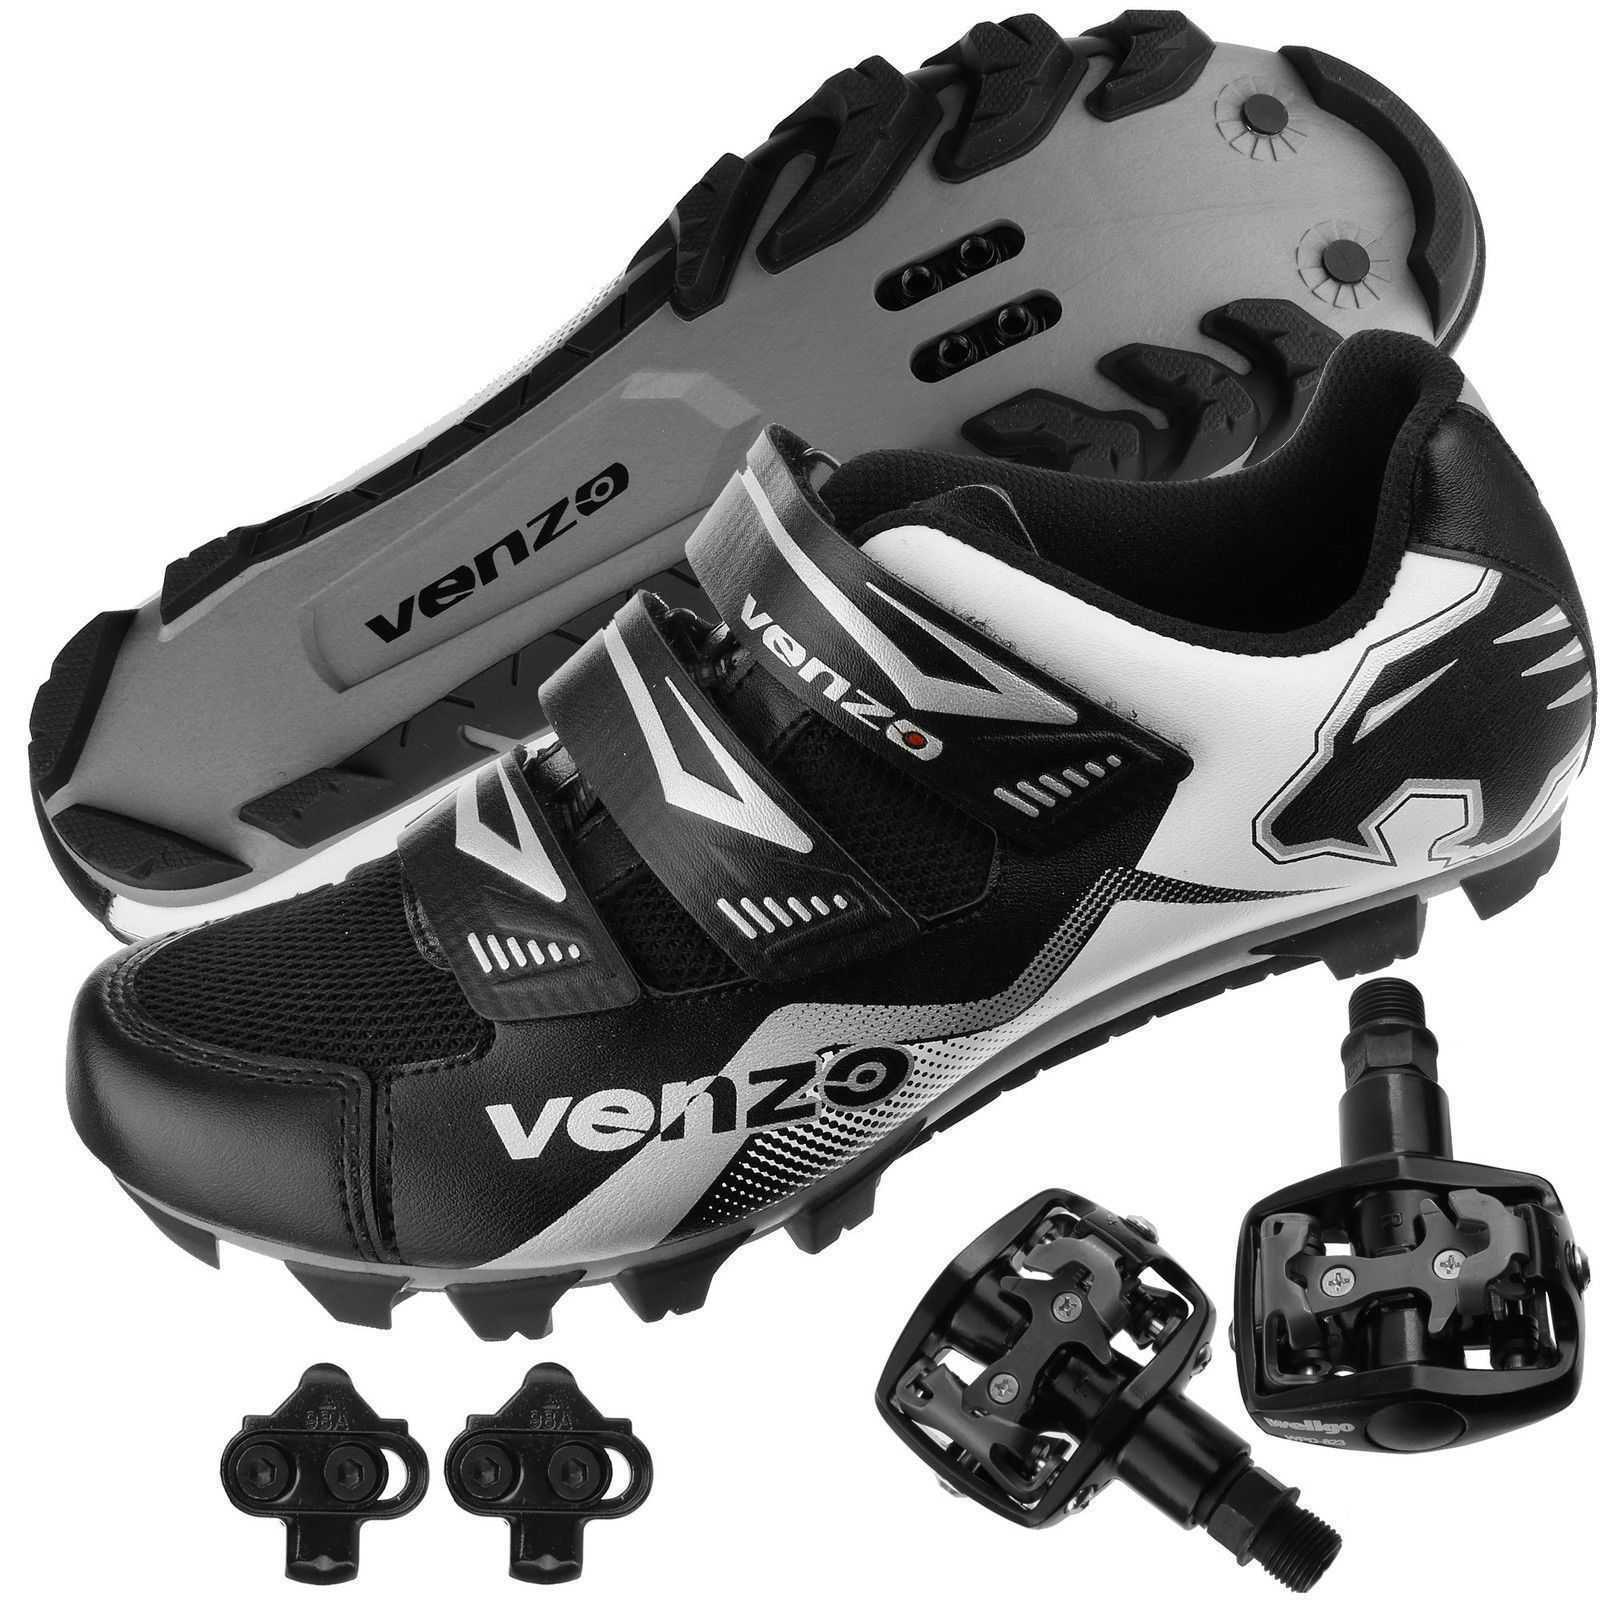 shoes cleats and pedals